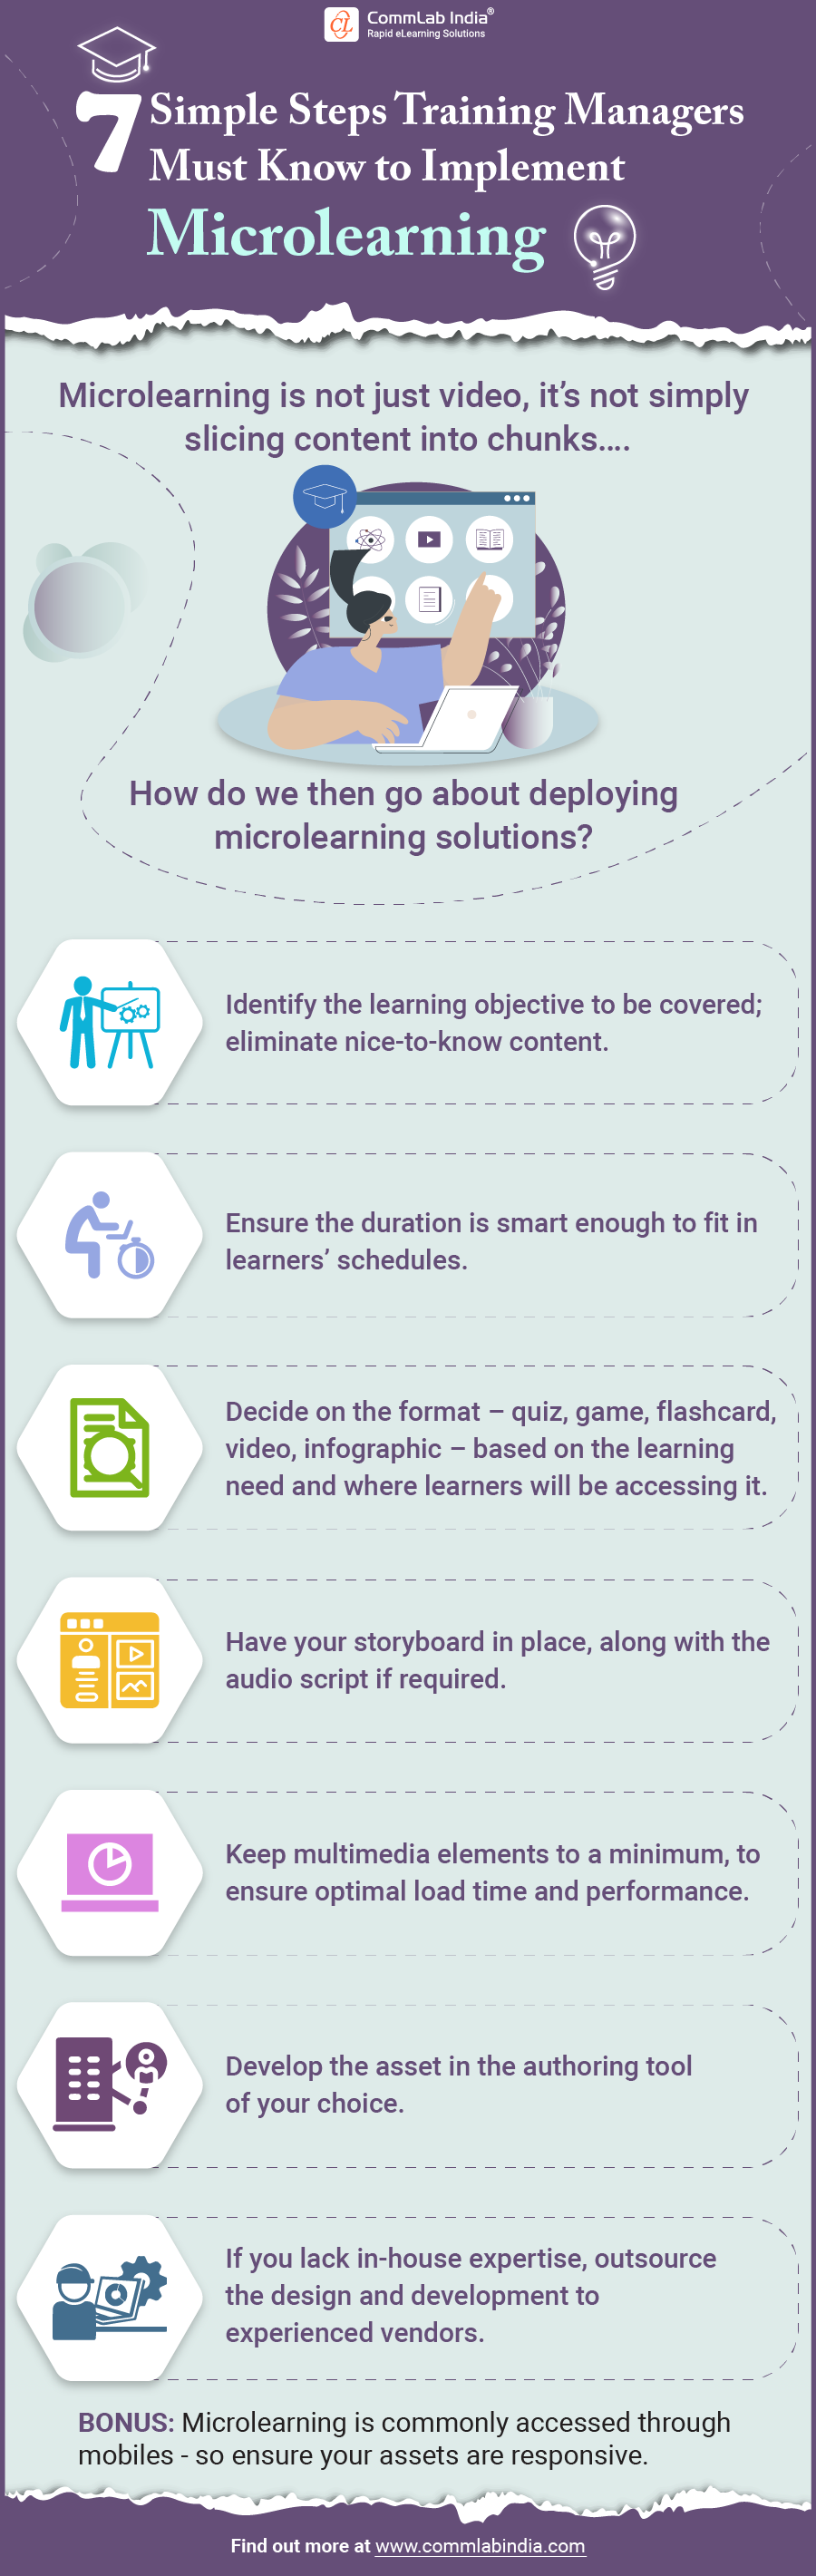 Steps to Implement Microlearning